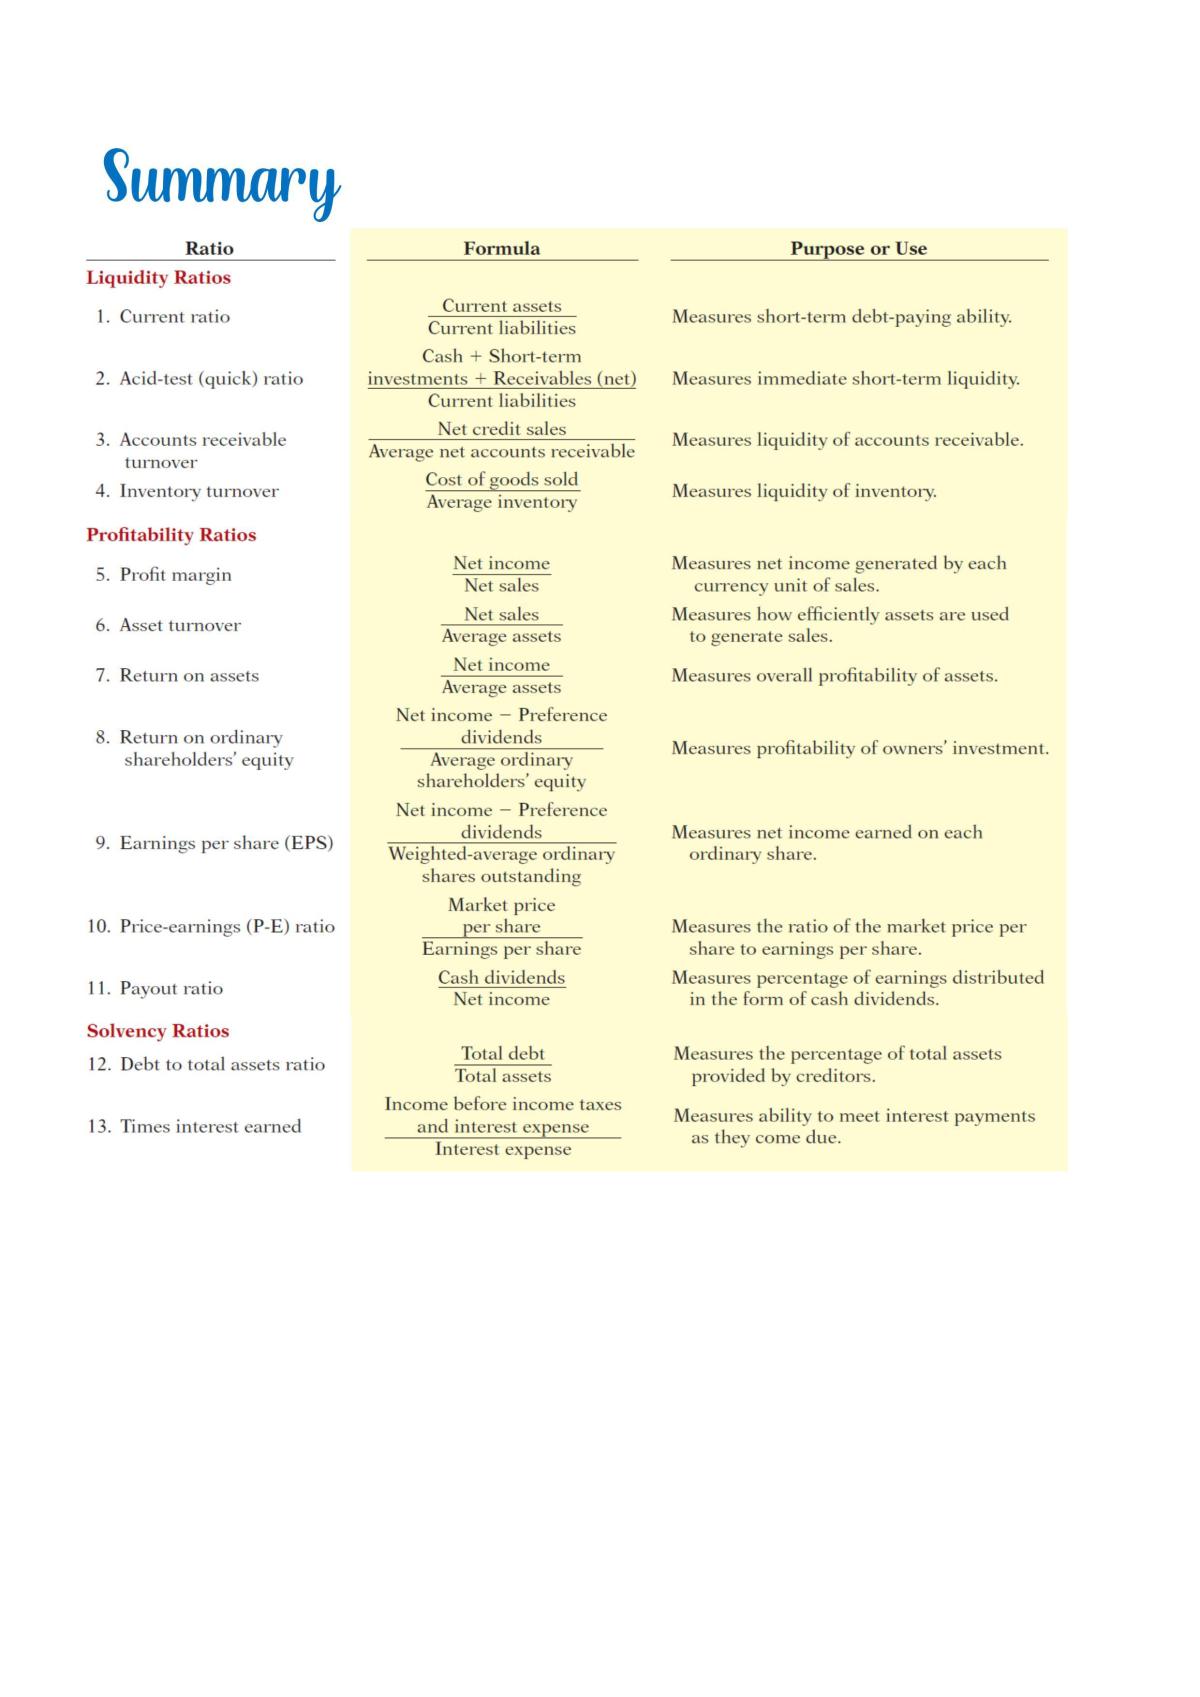 Principles of Accounting Full Notes - Page 43